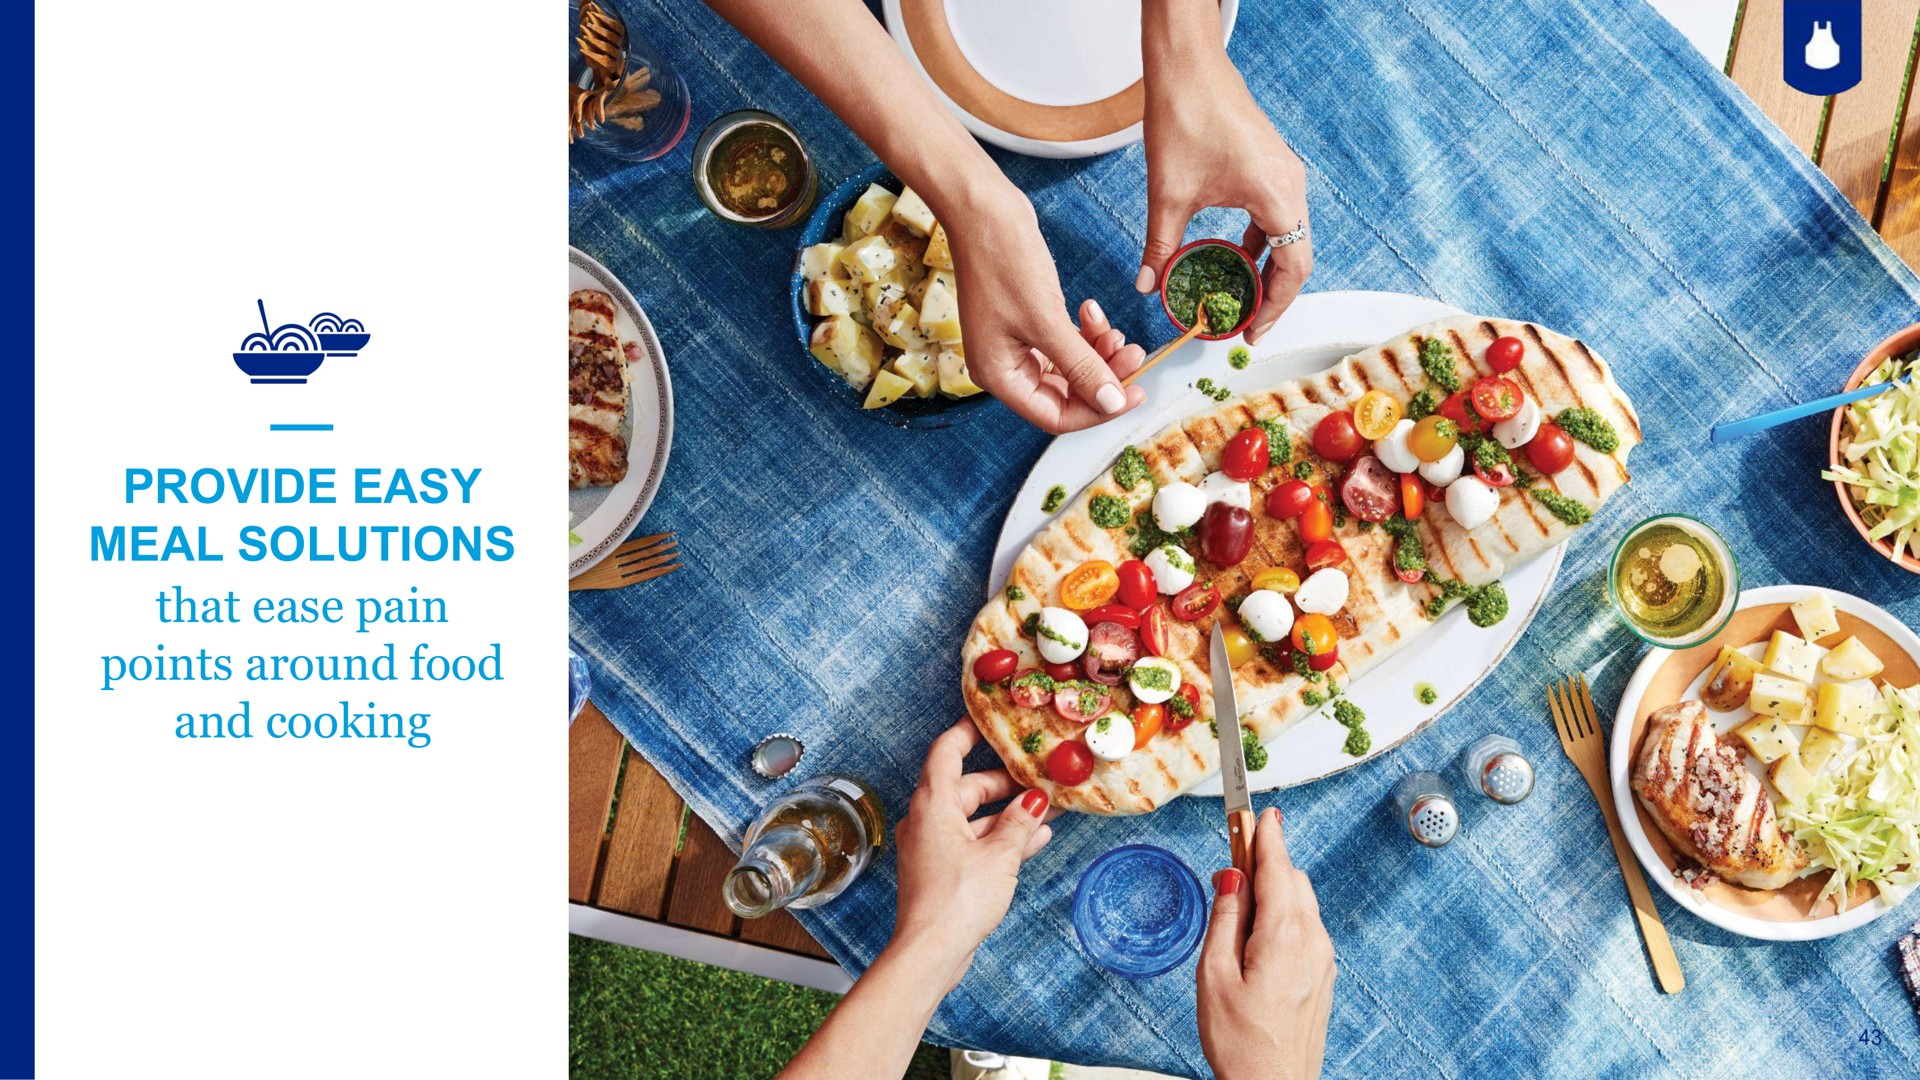 provide easy meal solutions that ease pain points around food and cooking | Blue Apron